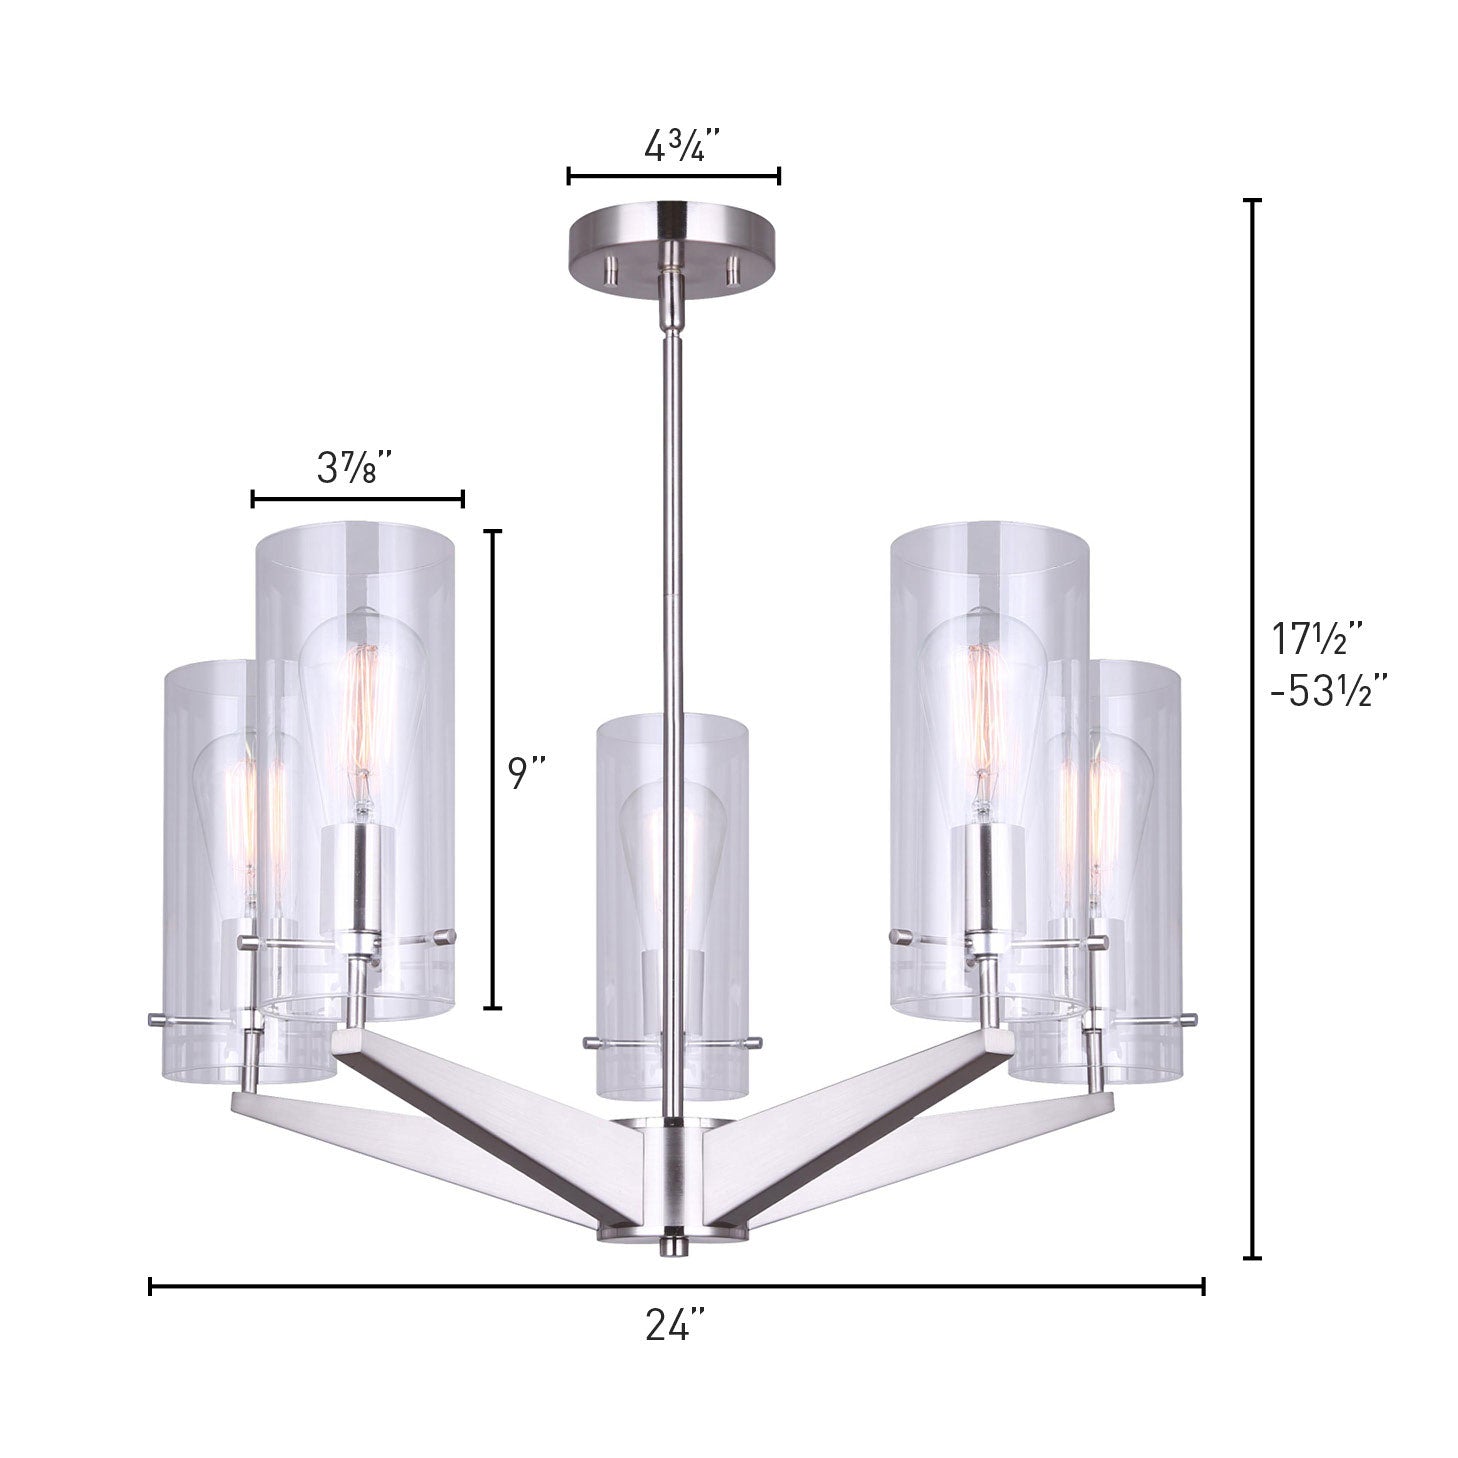 photo of a 4 light chandelier in a brushed nickel finish with 4 clear glass shades. showing dimensions 4 3/4  canopy, 24 inch wide light fixture, 17 and a half to 53 and a half heigh, glass shades with dimensions 3 7/8 inch wide by 9 inch high